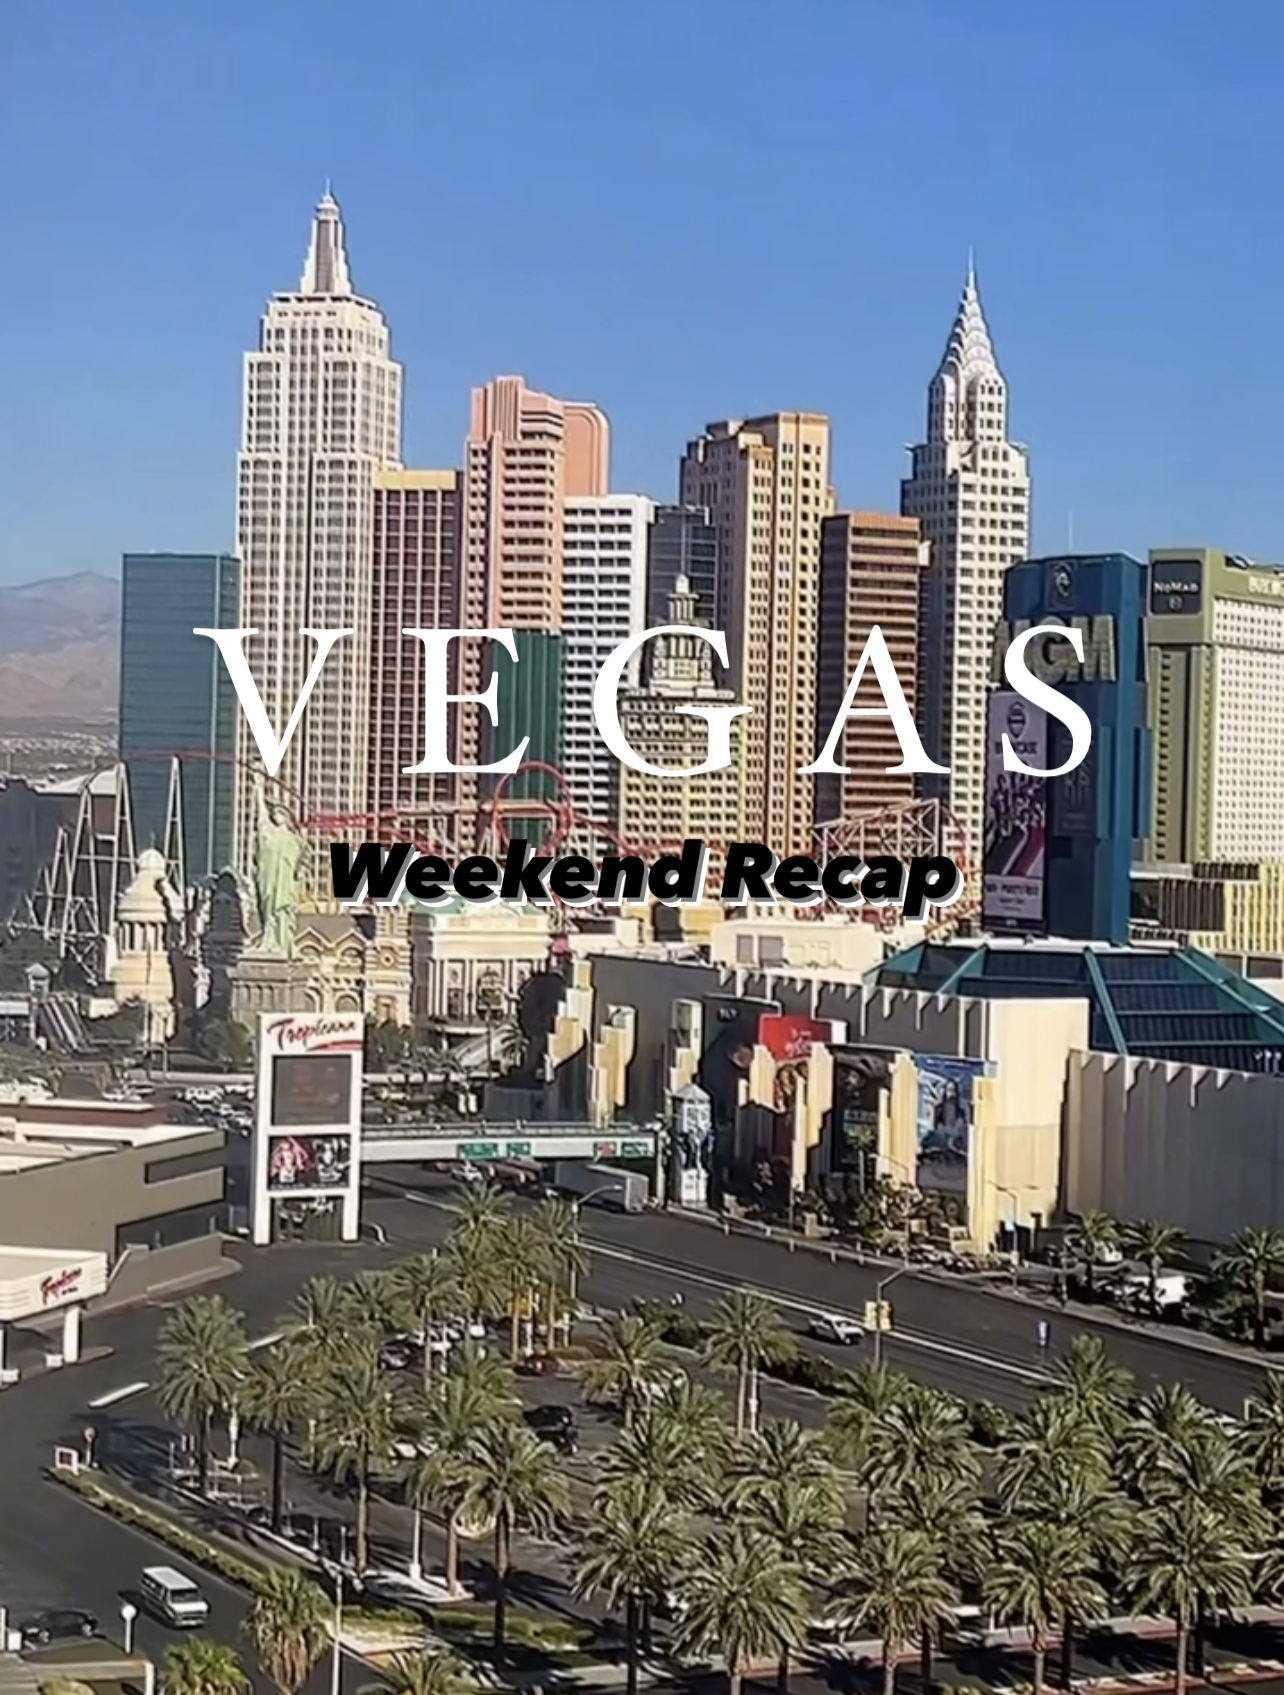 Things to do in Vegas: Quick weekend trip guide